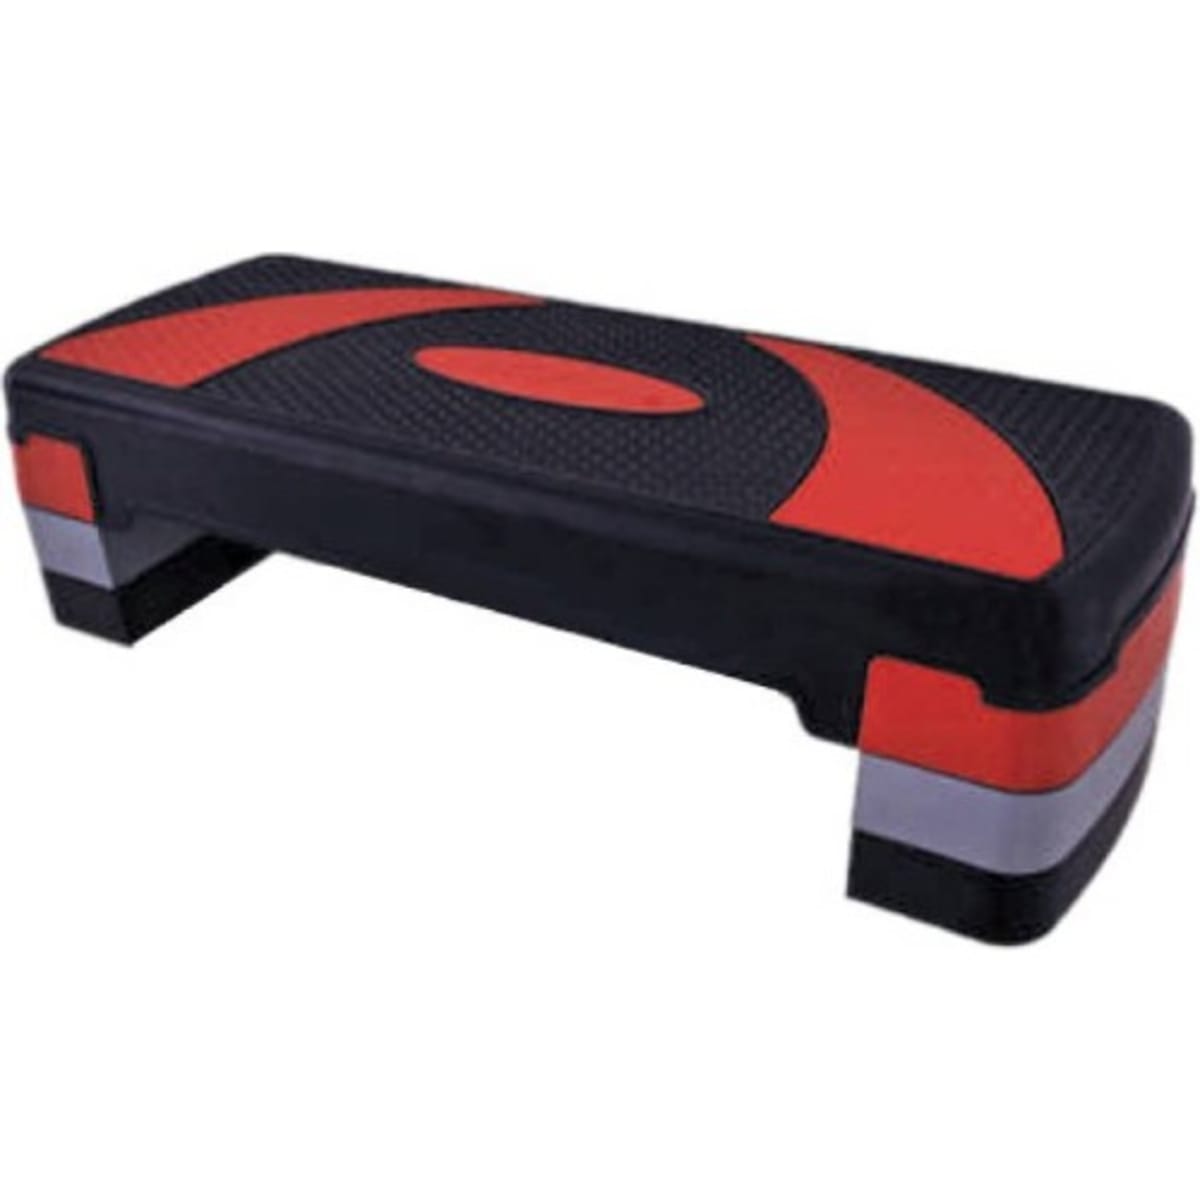 Aerobic Step Board For Body Exercises | Konga Shopping Online